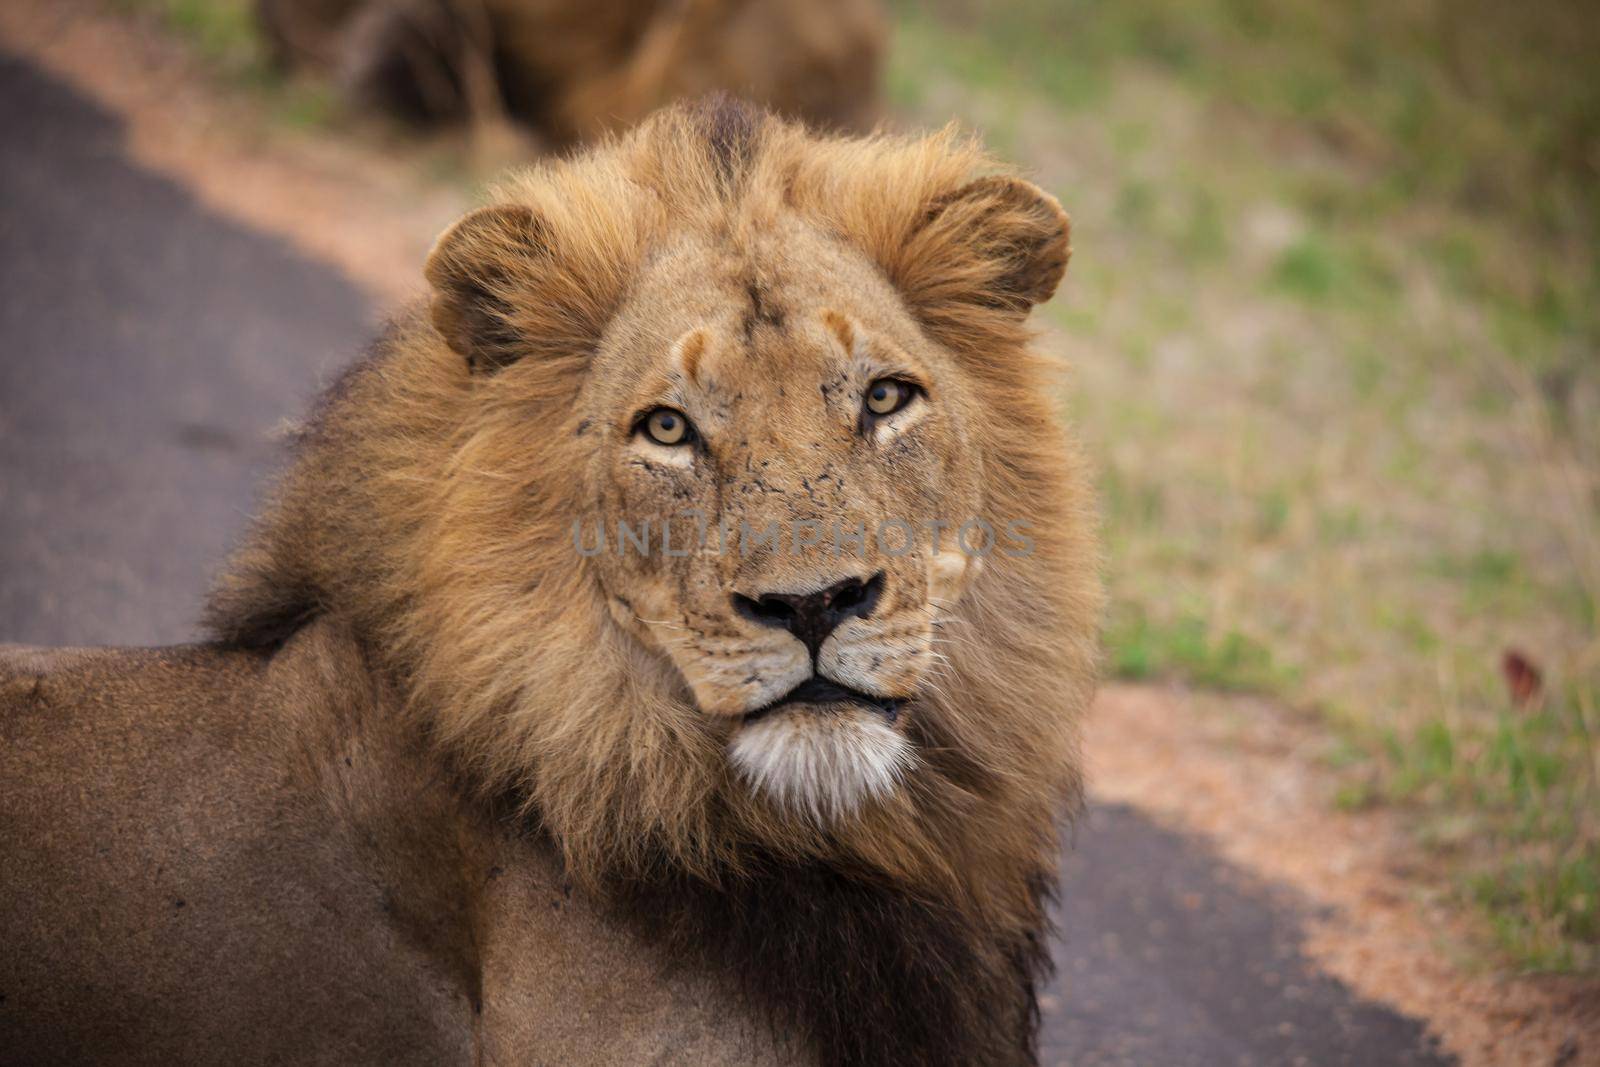 A dominant male Lion (Panthera leo) on a rainy morning in Kruger National Park. South Africa